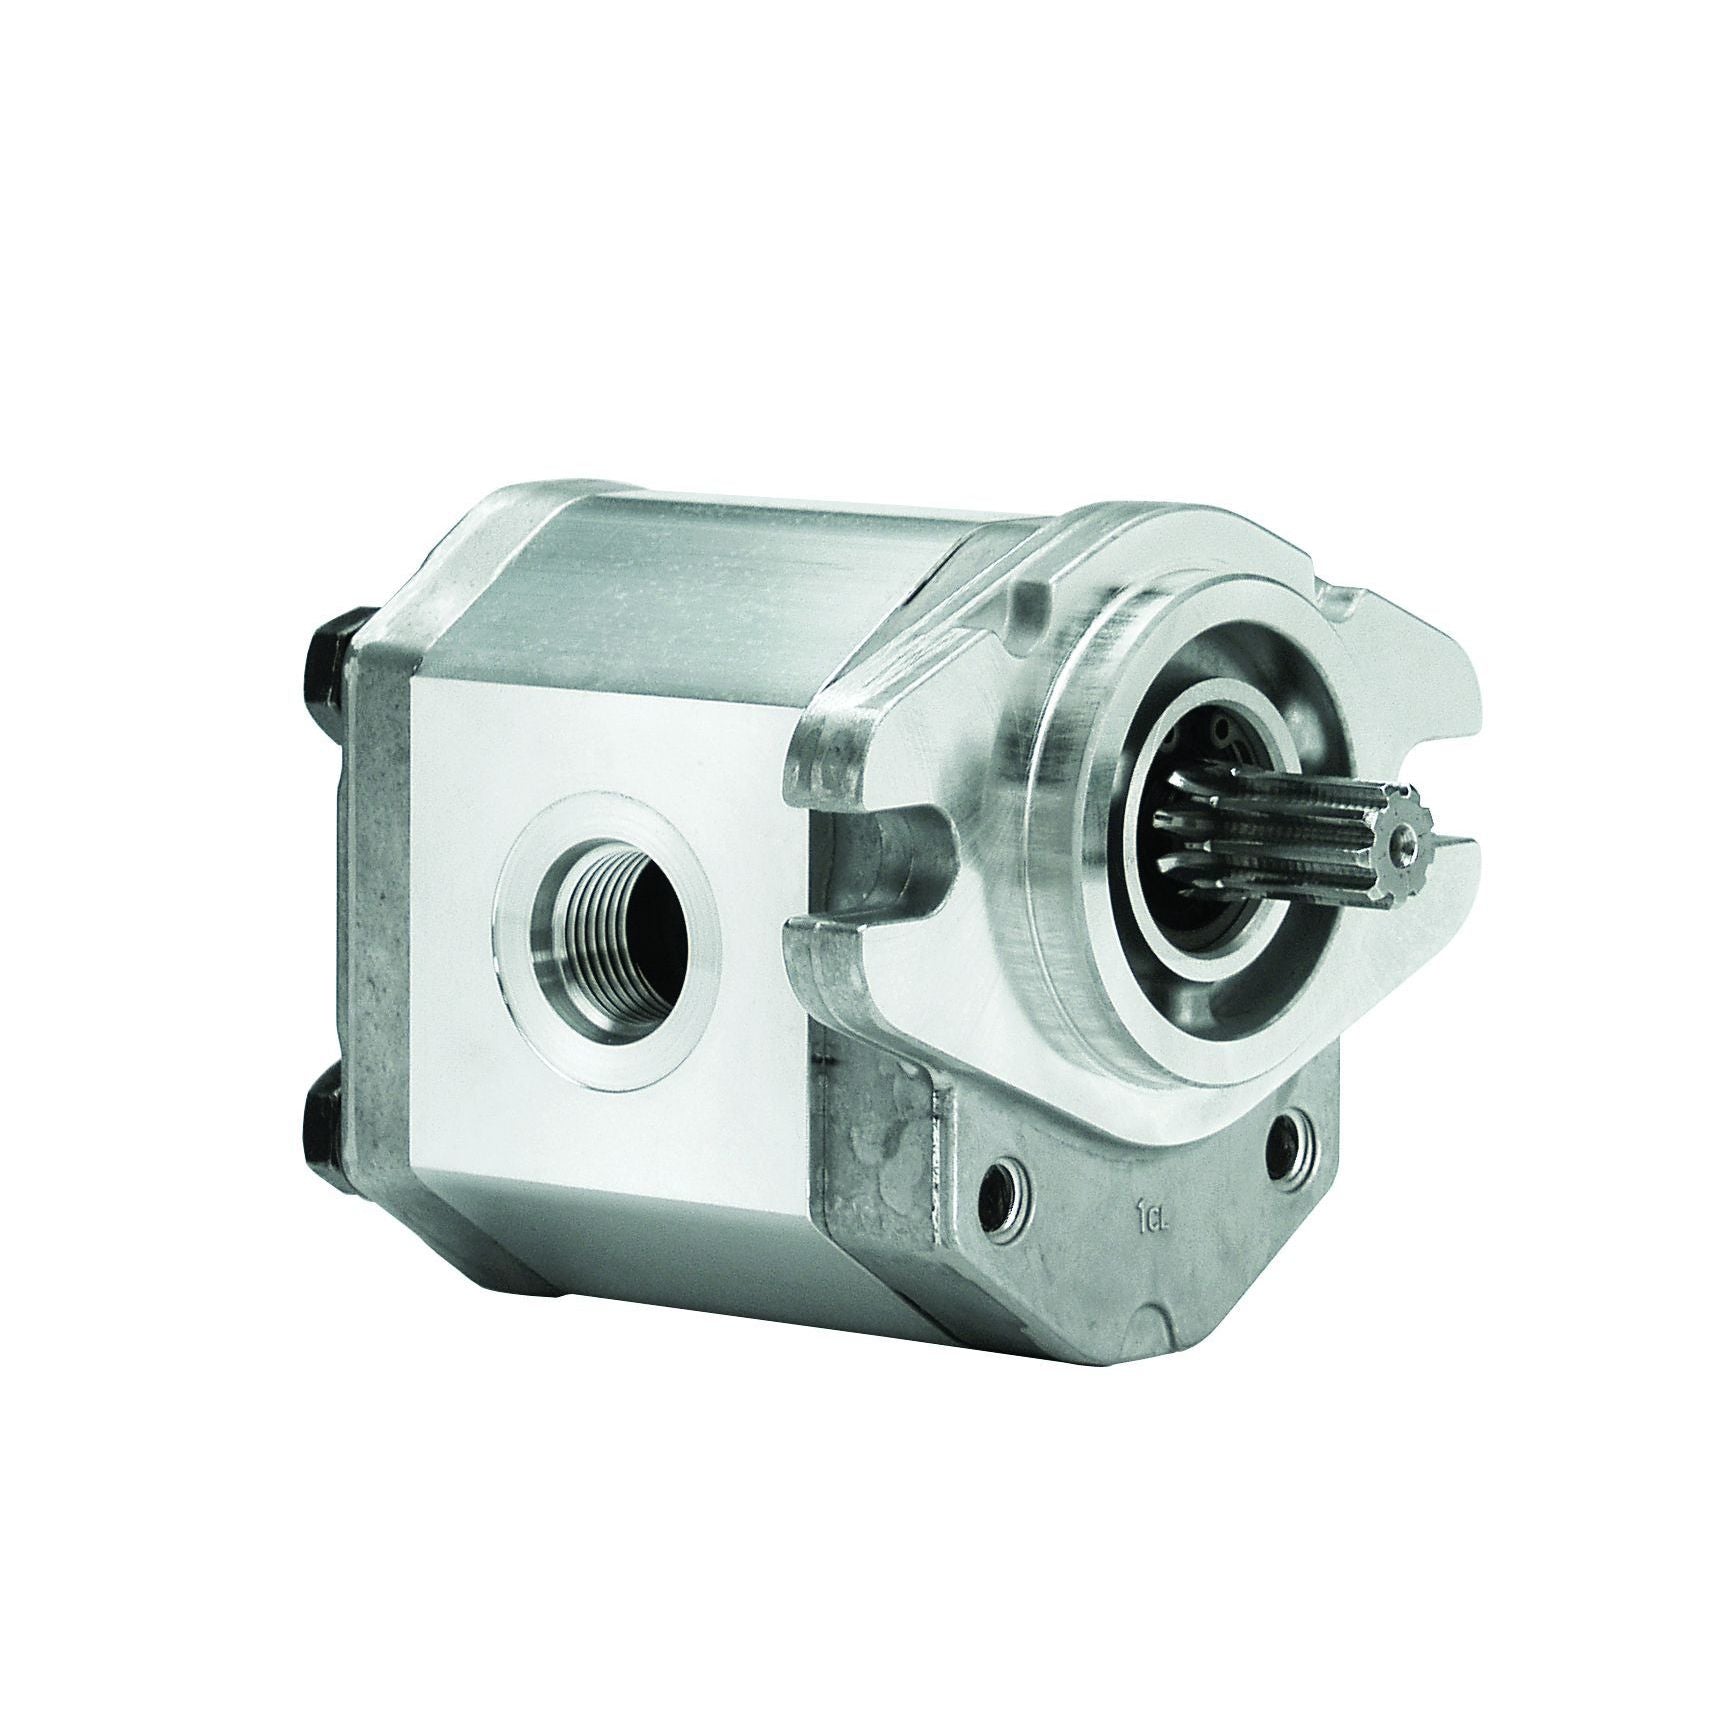 ALP1A-D-5-S1 : Marzocchi Gear Pump, CW, 3.5cc (0.2135in3), 1.66 GPM, 3625psi, 5000 RPM, #8 SAE (1/2") In, #6 SAE (3/8") Out, Splined Shaft 9T 20/40DP, SAE AA 2-Bolt Mount